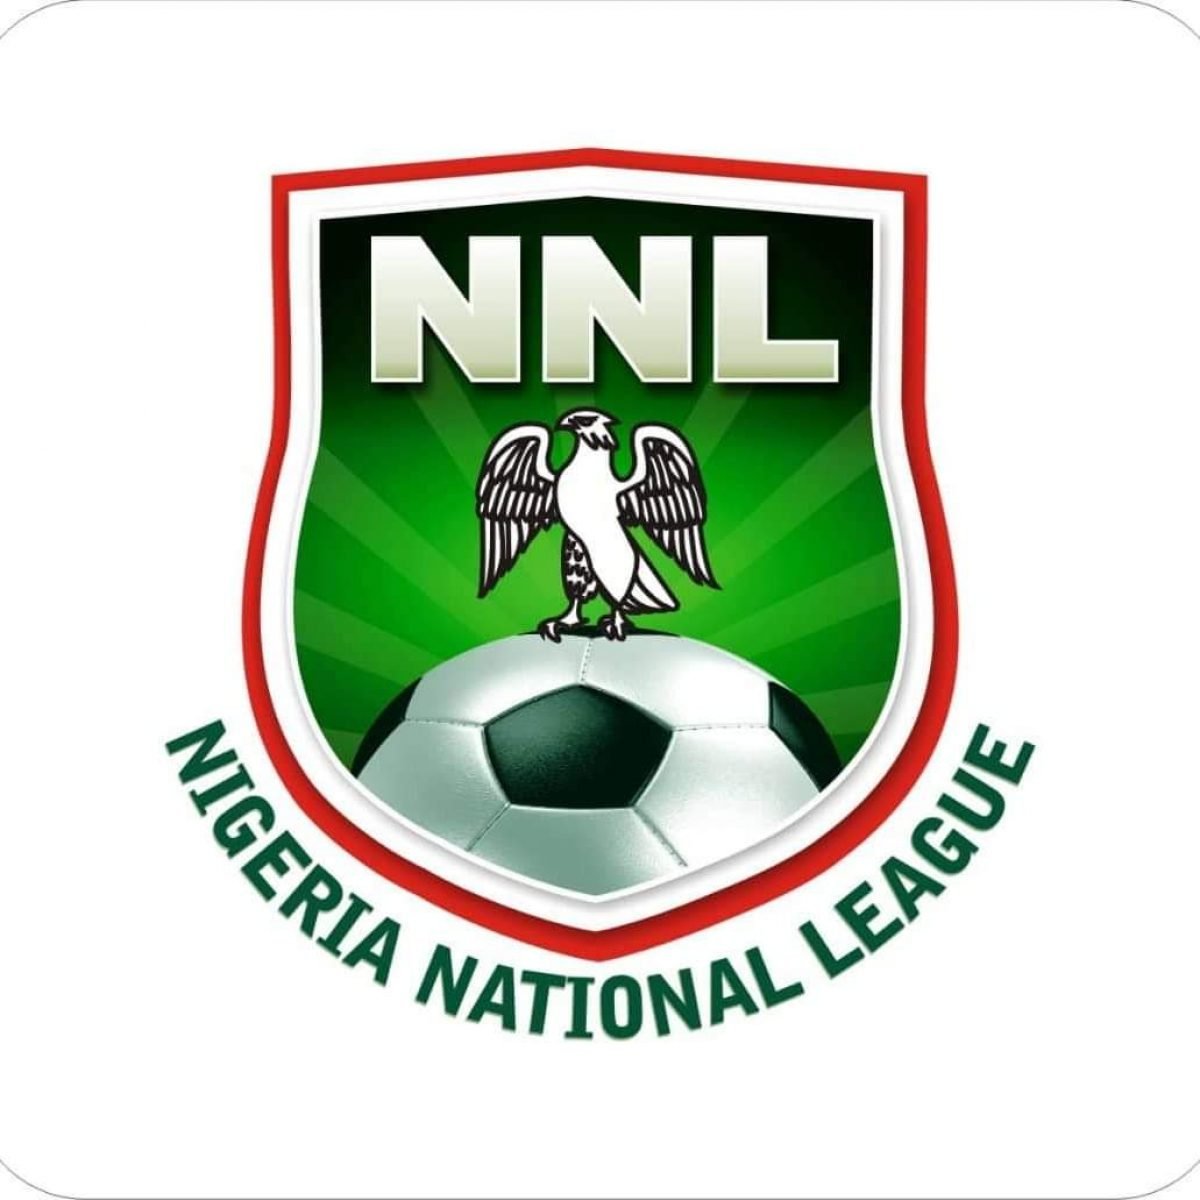 NNL 2021/2022 KICK OFF COUNTDOWN: NNL Spells Criteria For Coaches To Be Managers Of Clubs In The League